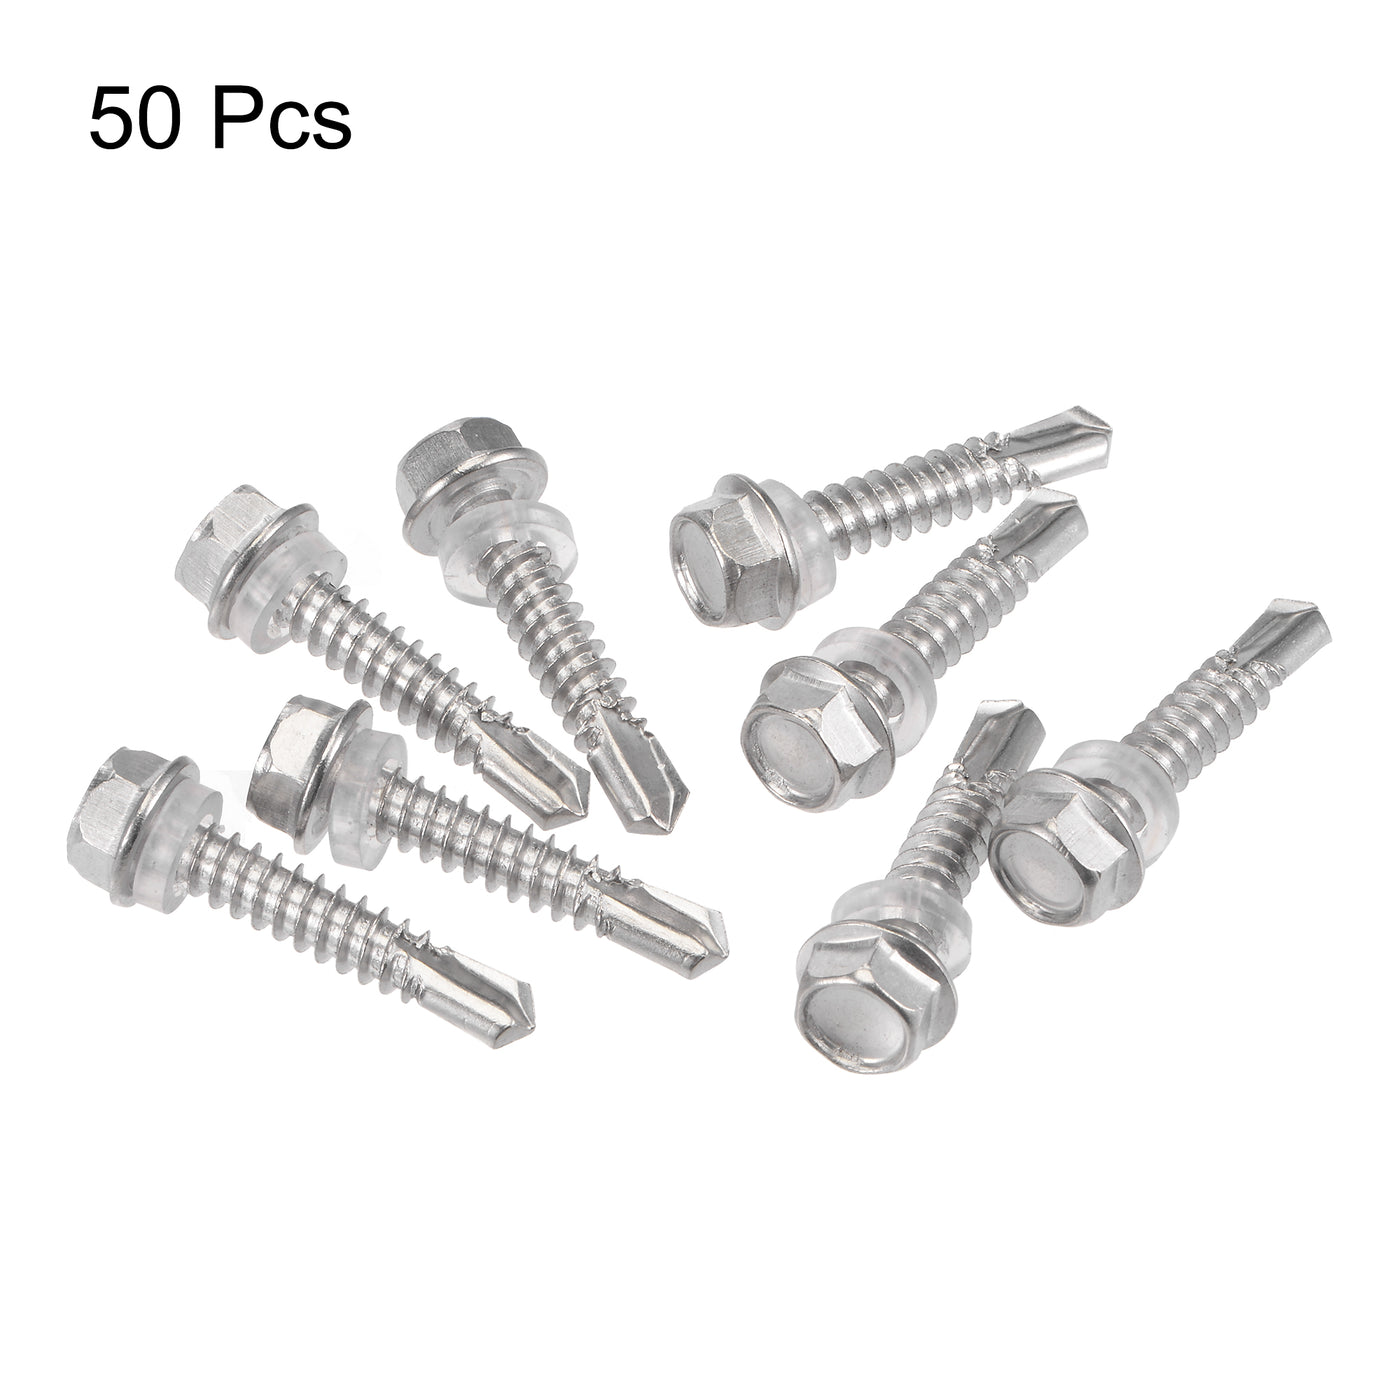 uxcell Uxcell #14 x 1 17/64" 410 Stainless Steel Hex Washer Head Self Drilling Screws 50pcs